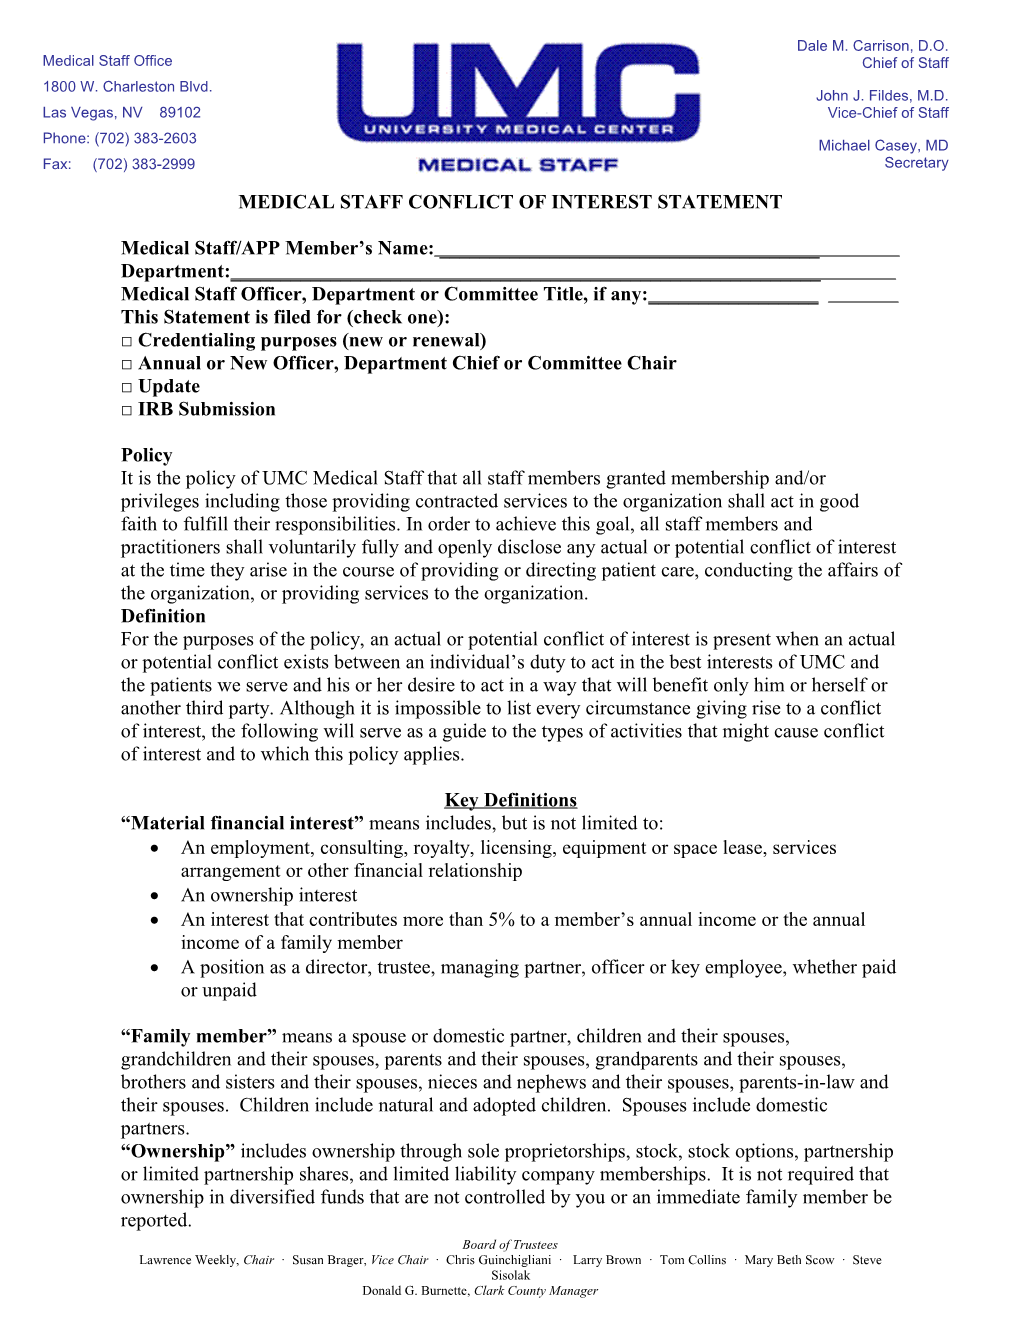 Medical Staff Conflict of Interest Statement